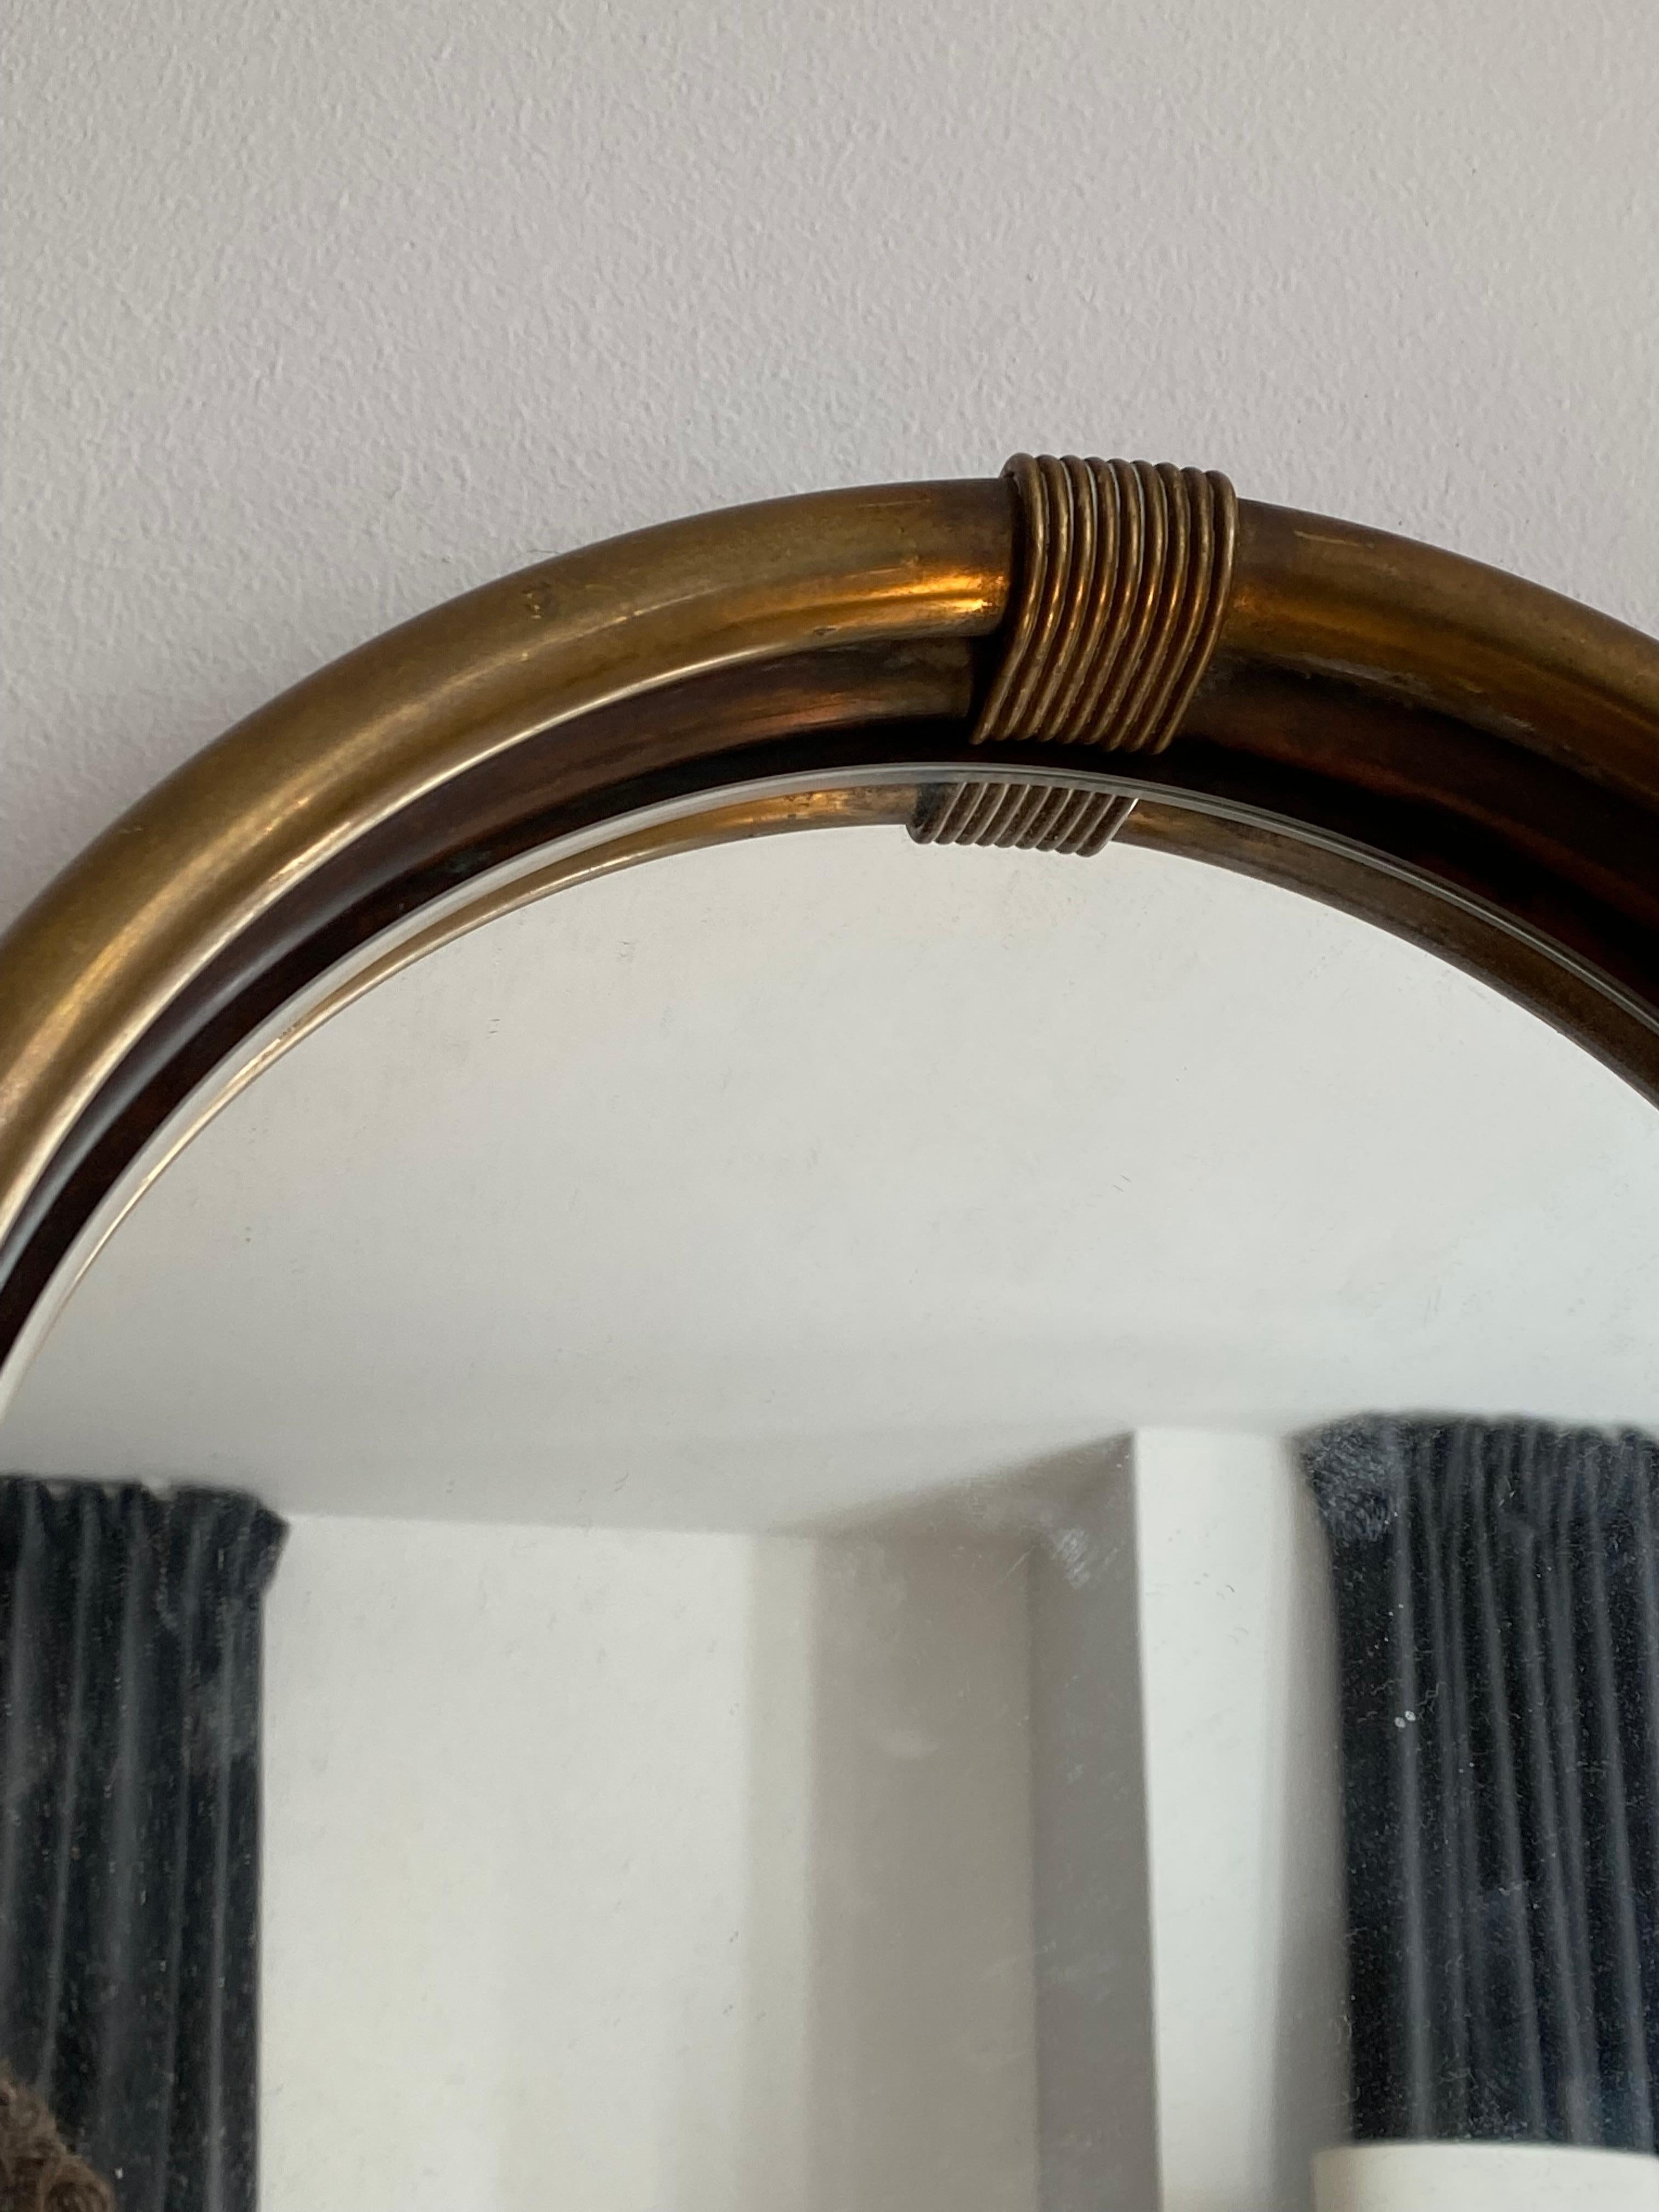 A wall mirror, produced in Italy, 1940s-1950s. Cut mirror glass is framed in brass frame.

Other designers of the period include Gio Ponti, Fontana Arte, Paolo Buffa, Franco Albini, and Jean Royere.